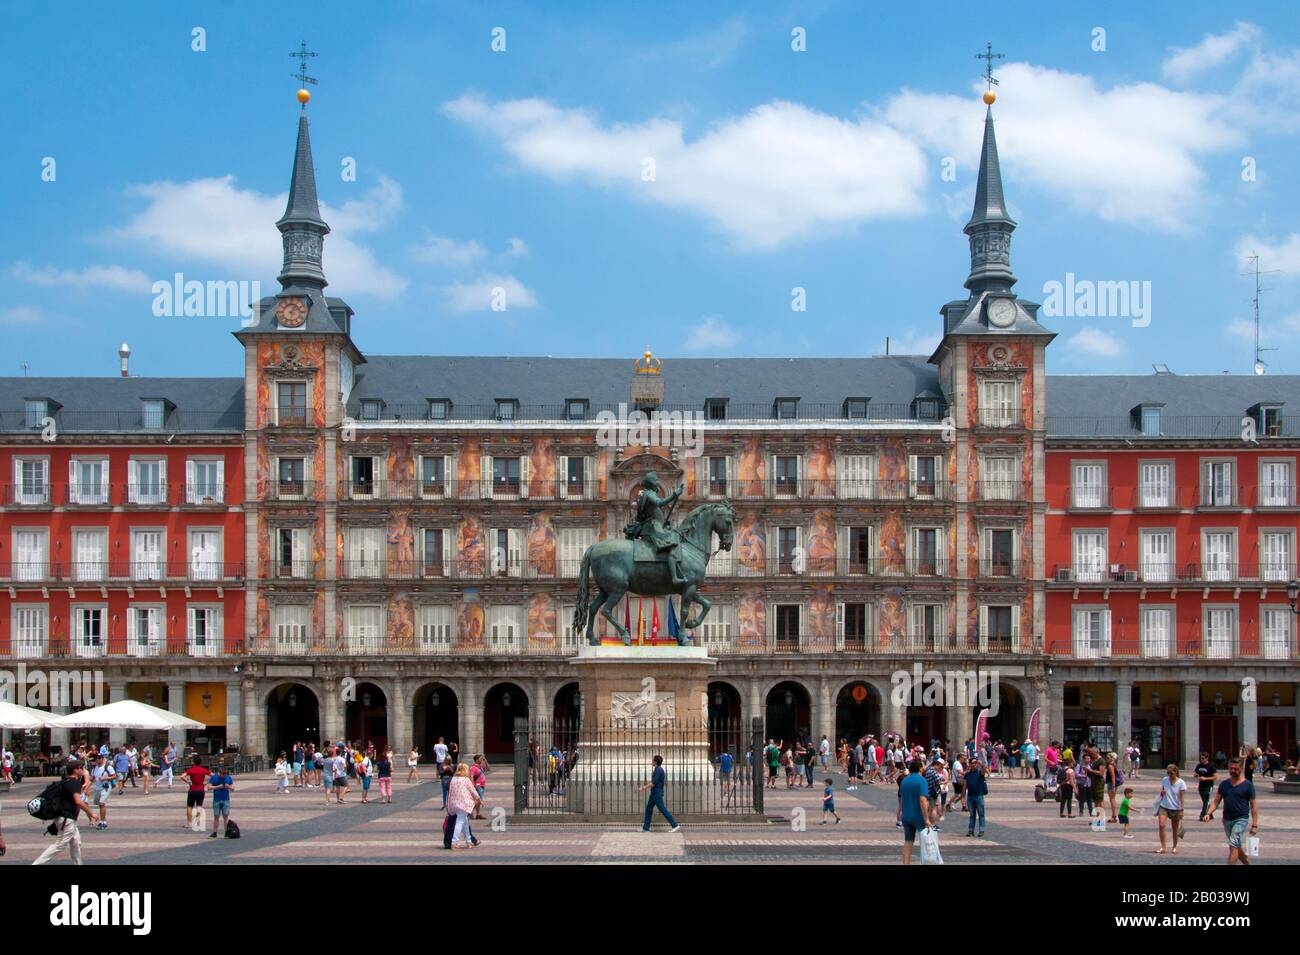 Philip III (14 April 1578 – 31 March 1621) was King of Spain. He was also, as Philip II, King of Portugal, Naples, Sicily and Sardinia and Duke of Milan from 1598 until his death.  The Plaza Mayor was first built (1580–1619) during Philip III's reign. The plaza as we see it today was the work of the Spanish architect Juan de Villanueva (1739 - 1811) who reconstructed the plaza in 1790. Stock Photo